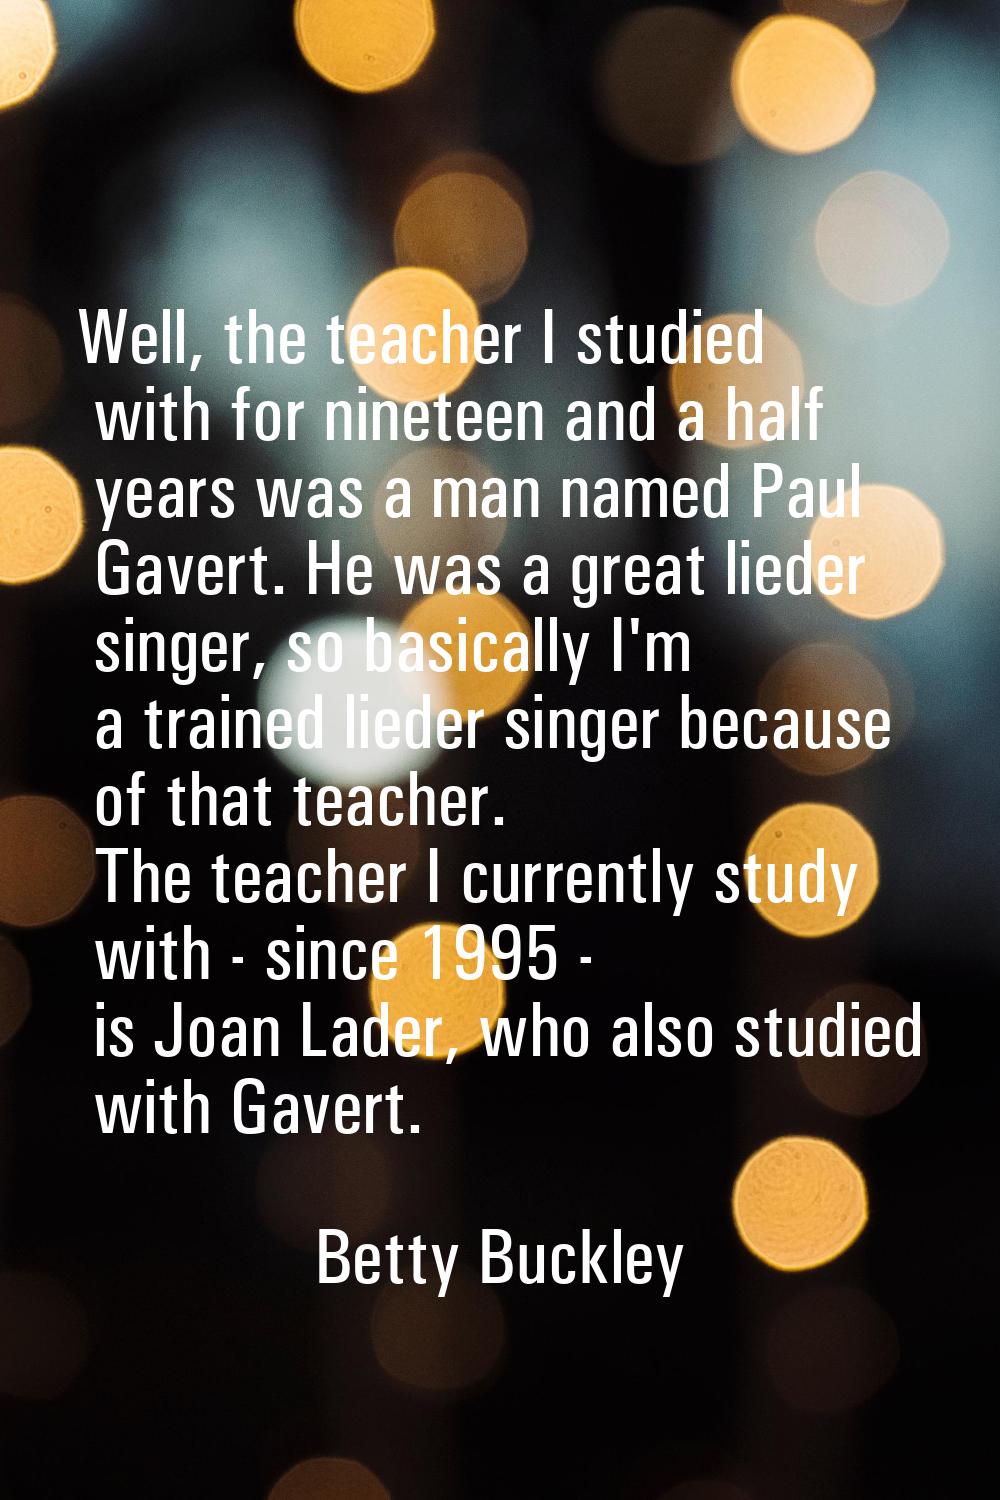 Well, the teacher I studied with for nineteen and a half years was a man named Paul Gavert. He was 